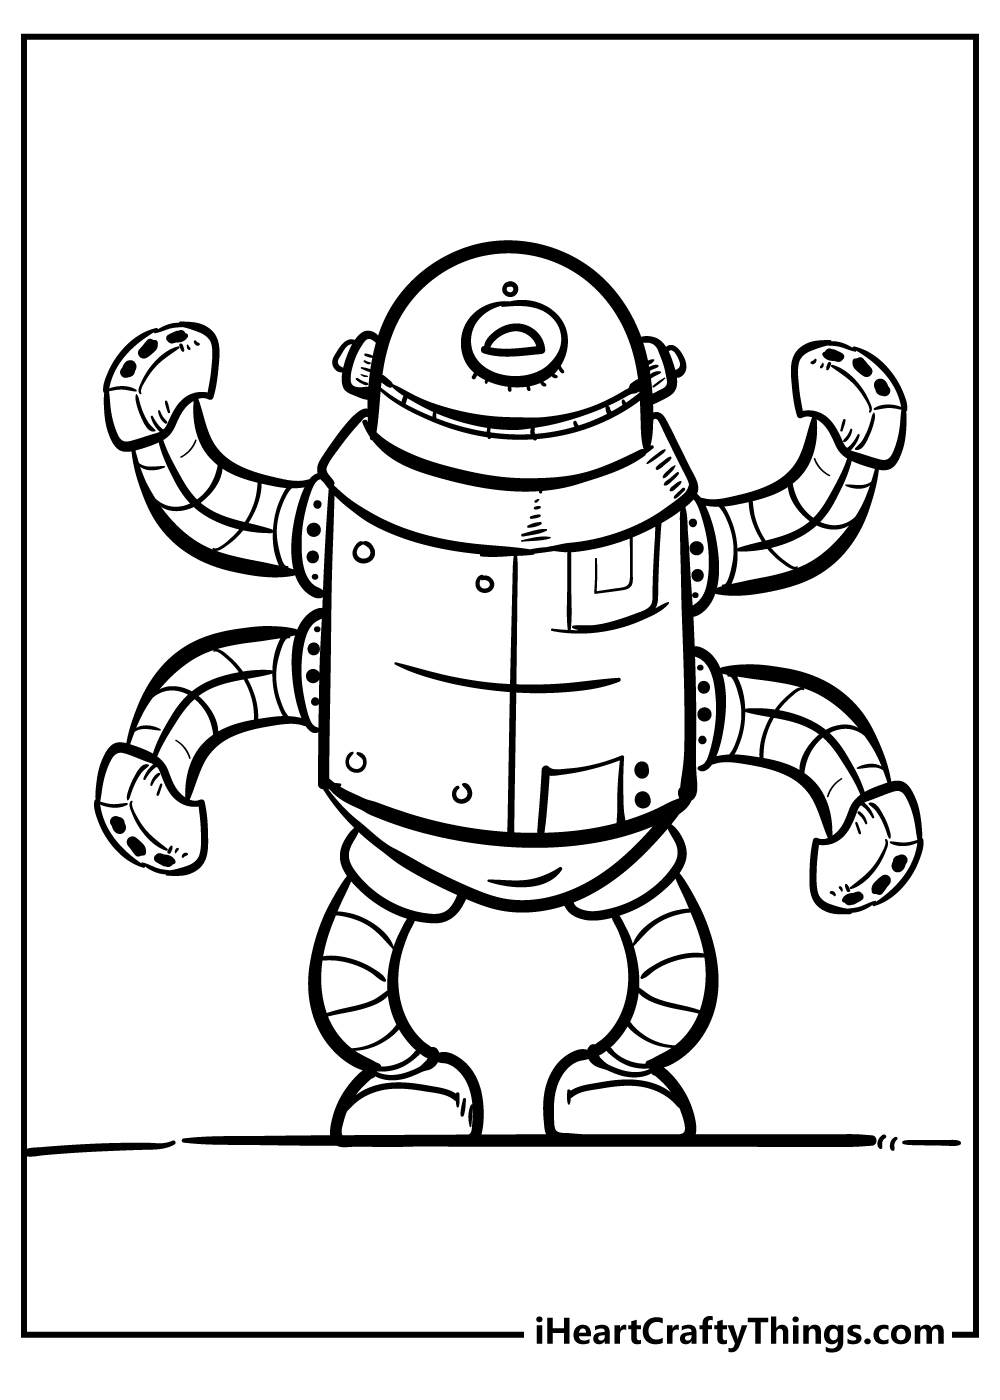 Printable Robot Coloring Pages Updated 20